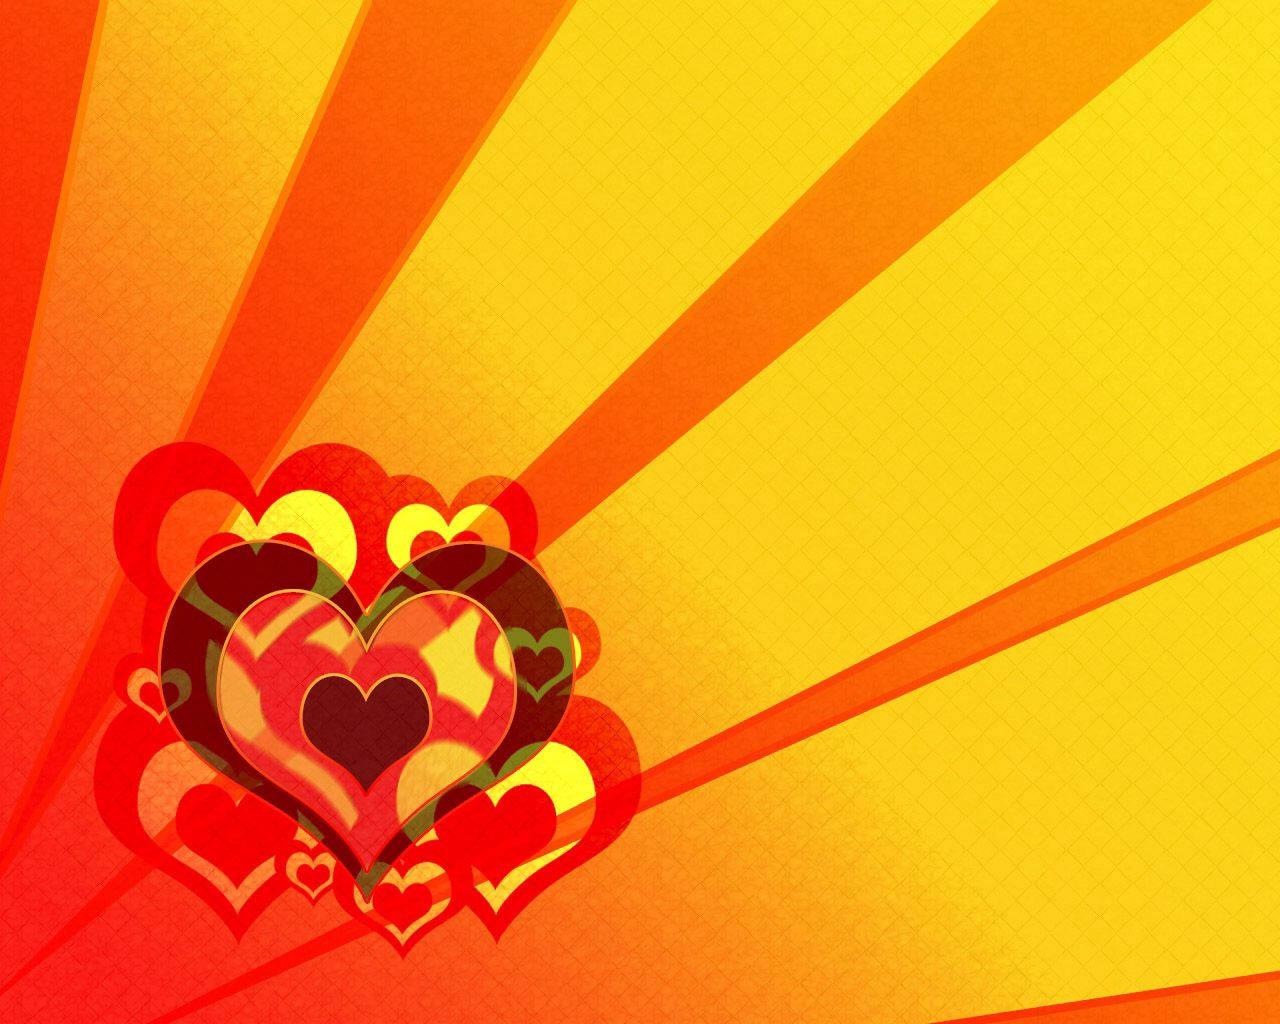 Download Bunch Of Hearts And Orange Lines Wallpaper